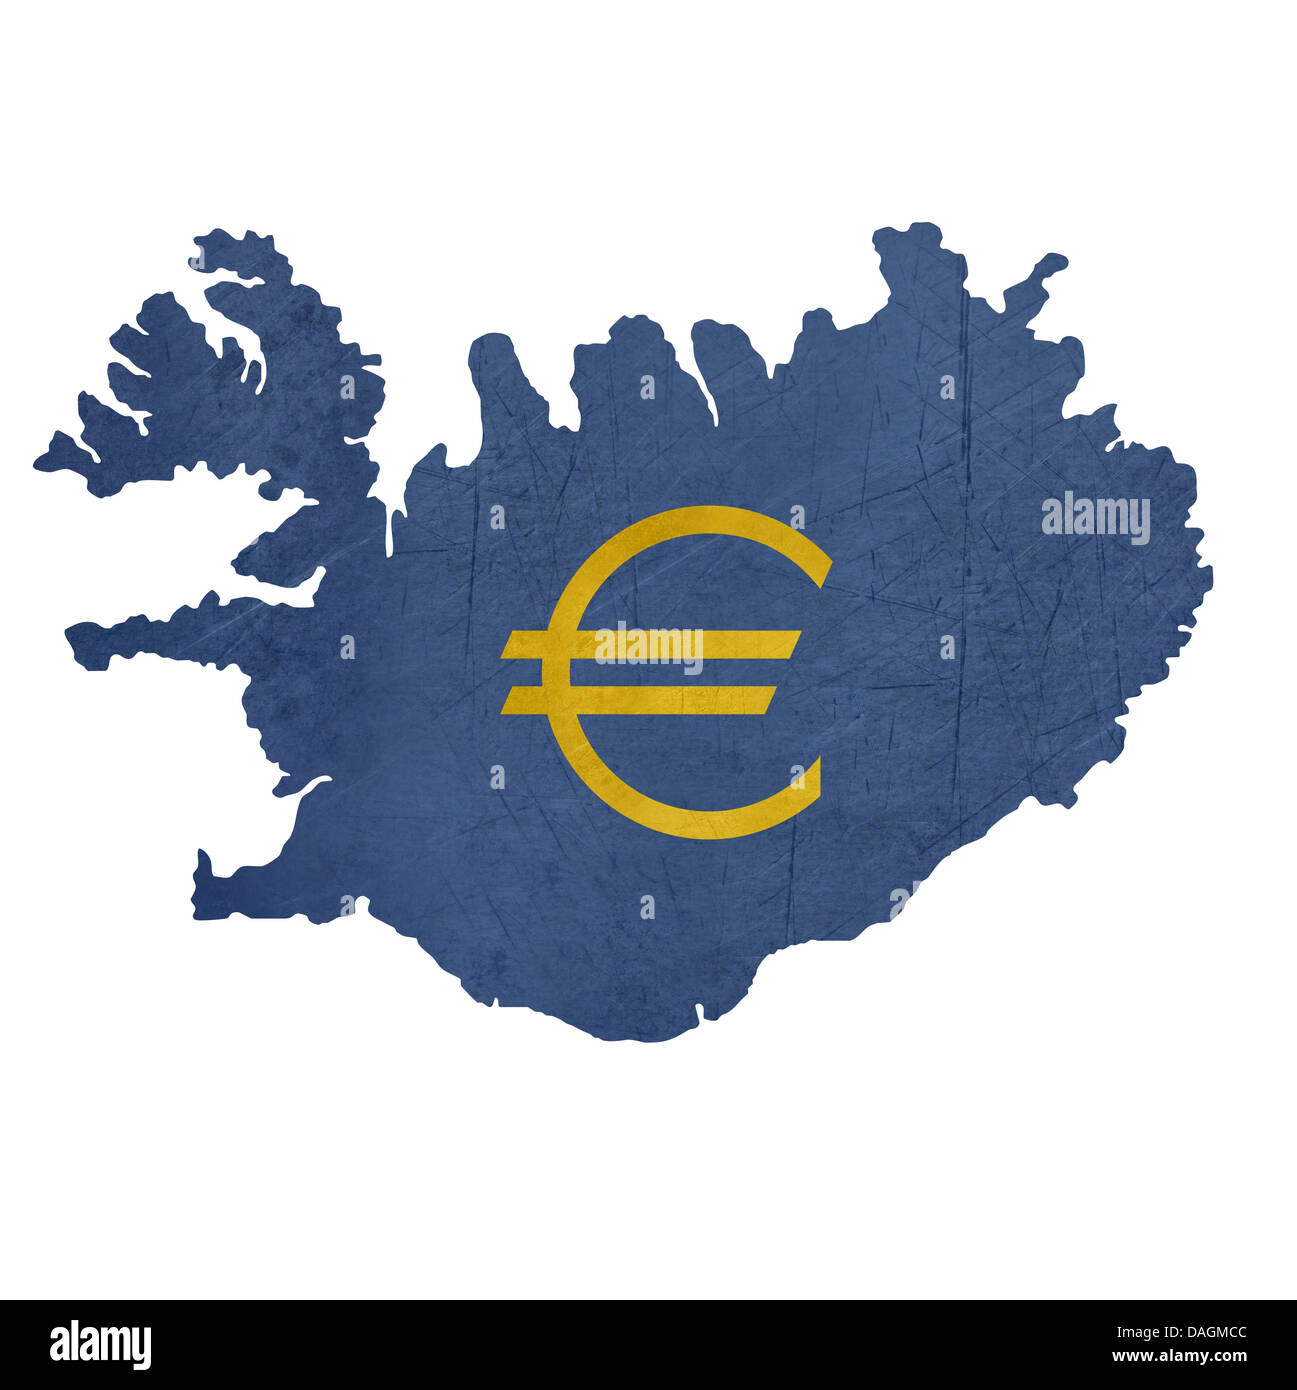 European currency symbol on map of Iceland isolated on white background. Stock Photo